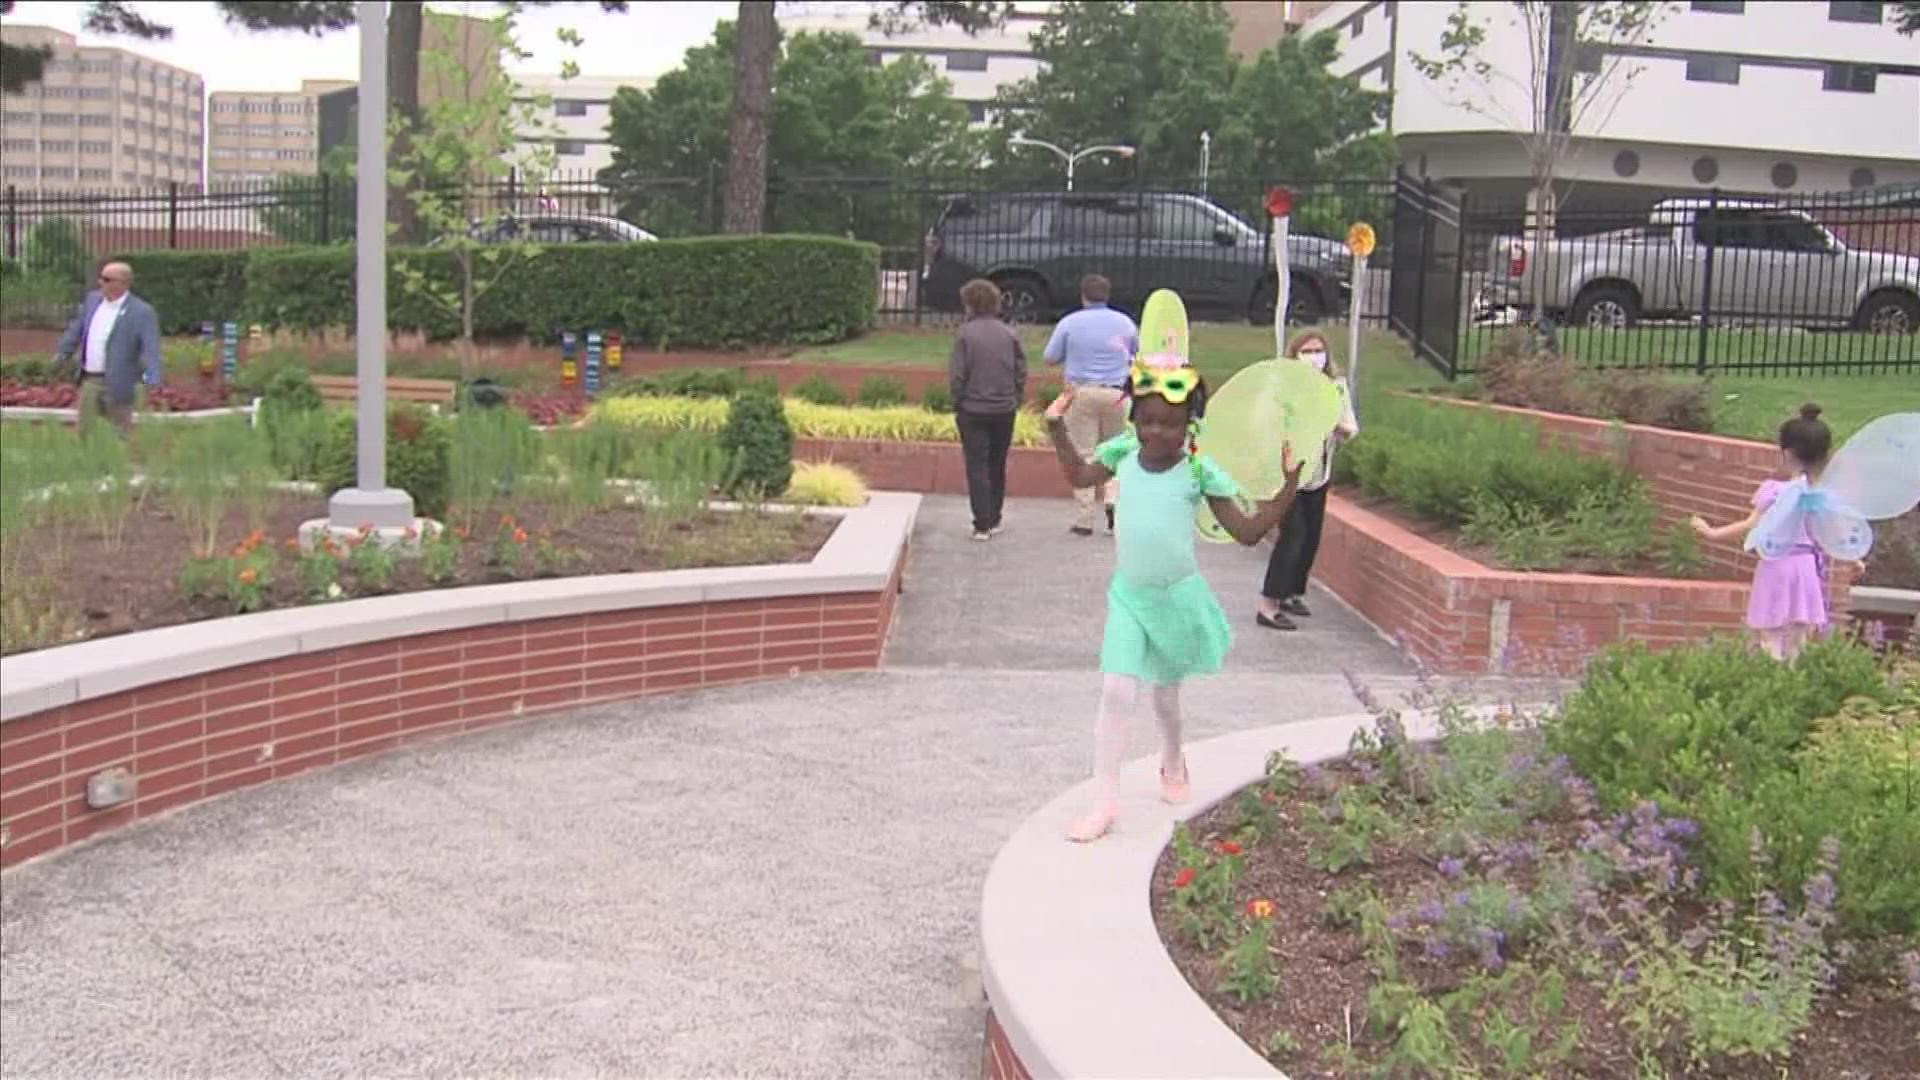 The hospital held the grand opening of the Le Bonheur Green Tuesday.